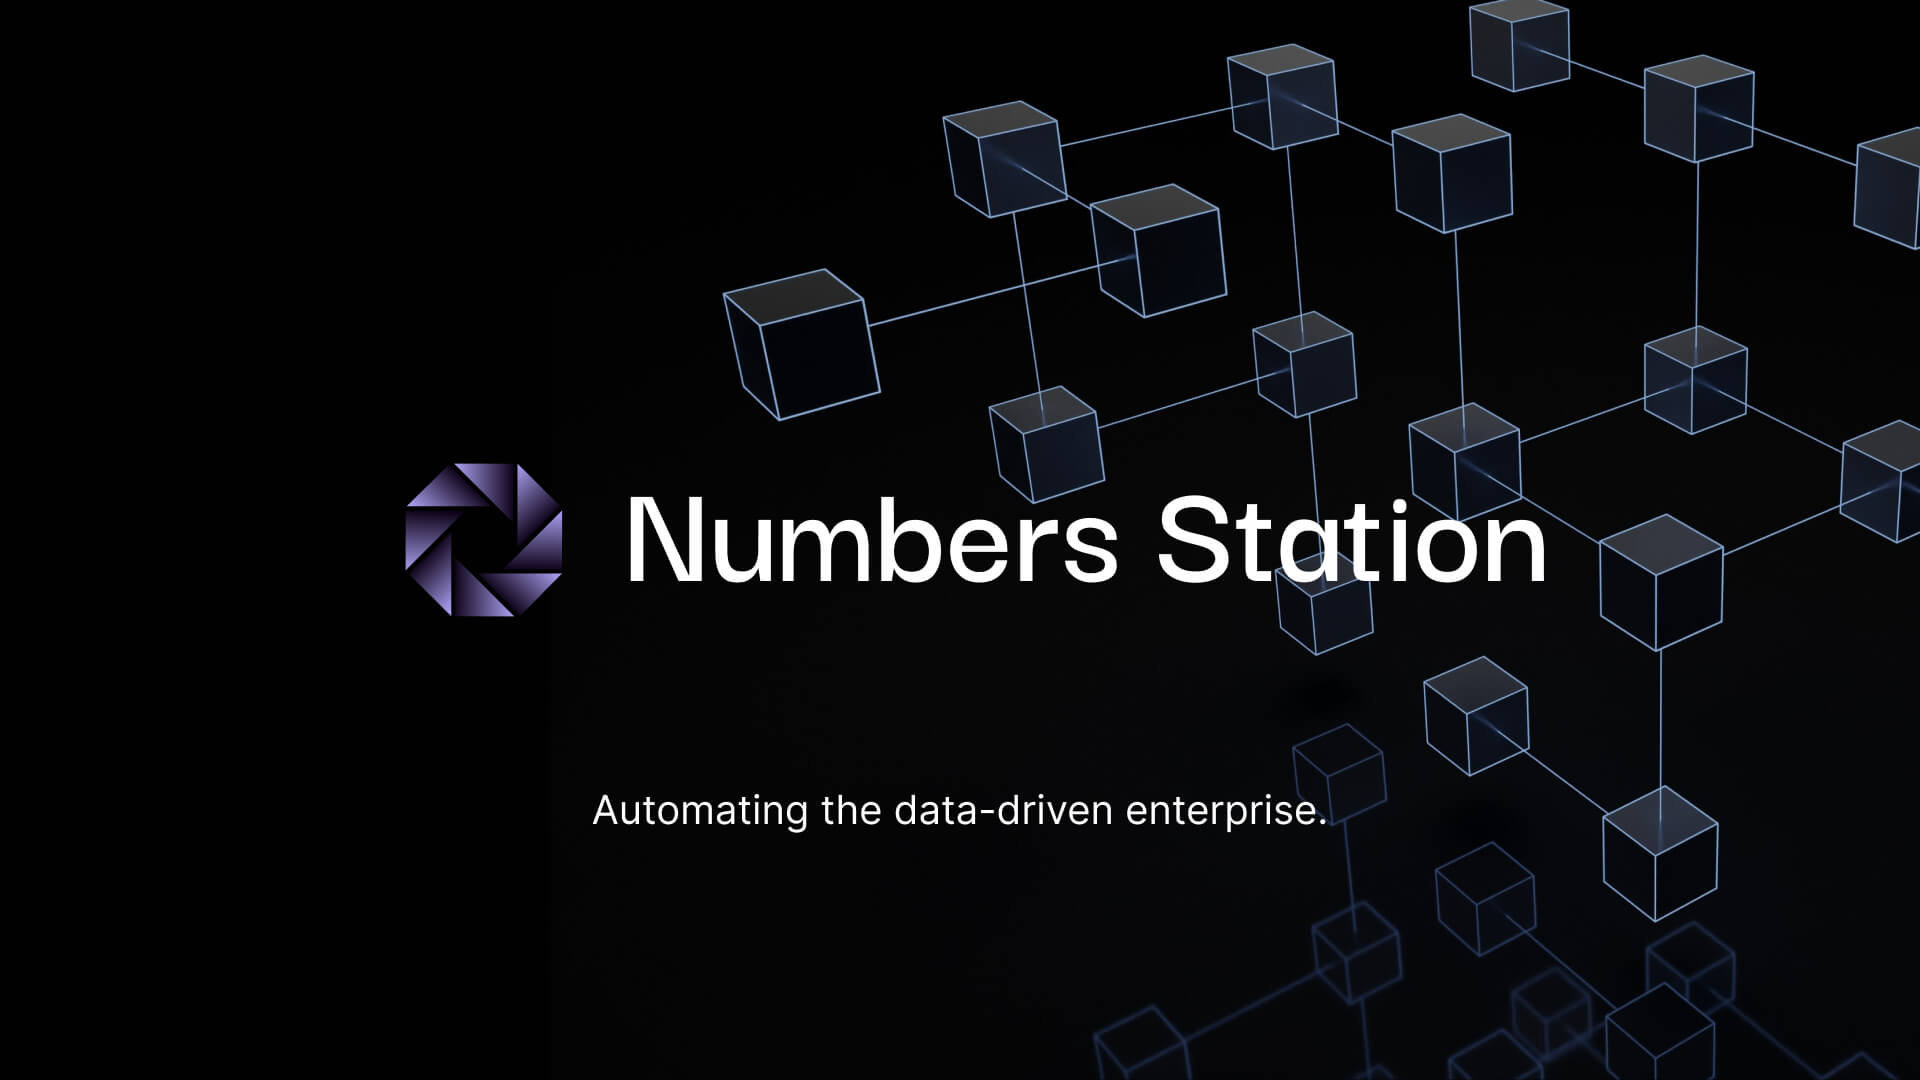 Numbers Station Revolutionizes Data Analytics With New Cloud-Based Product